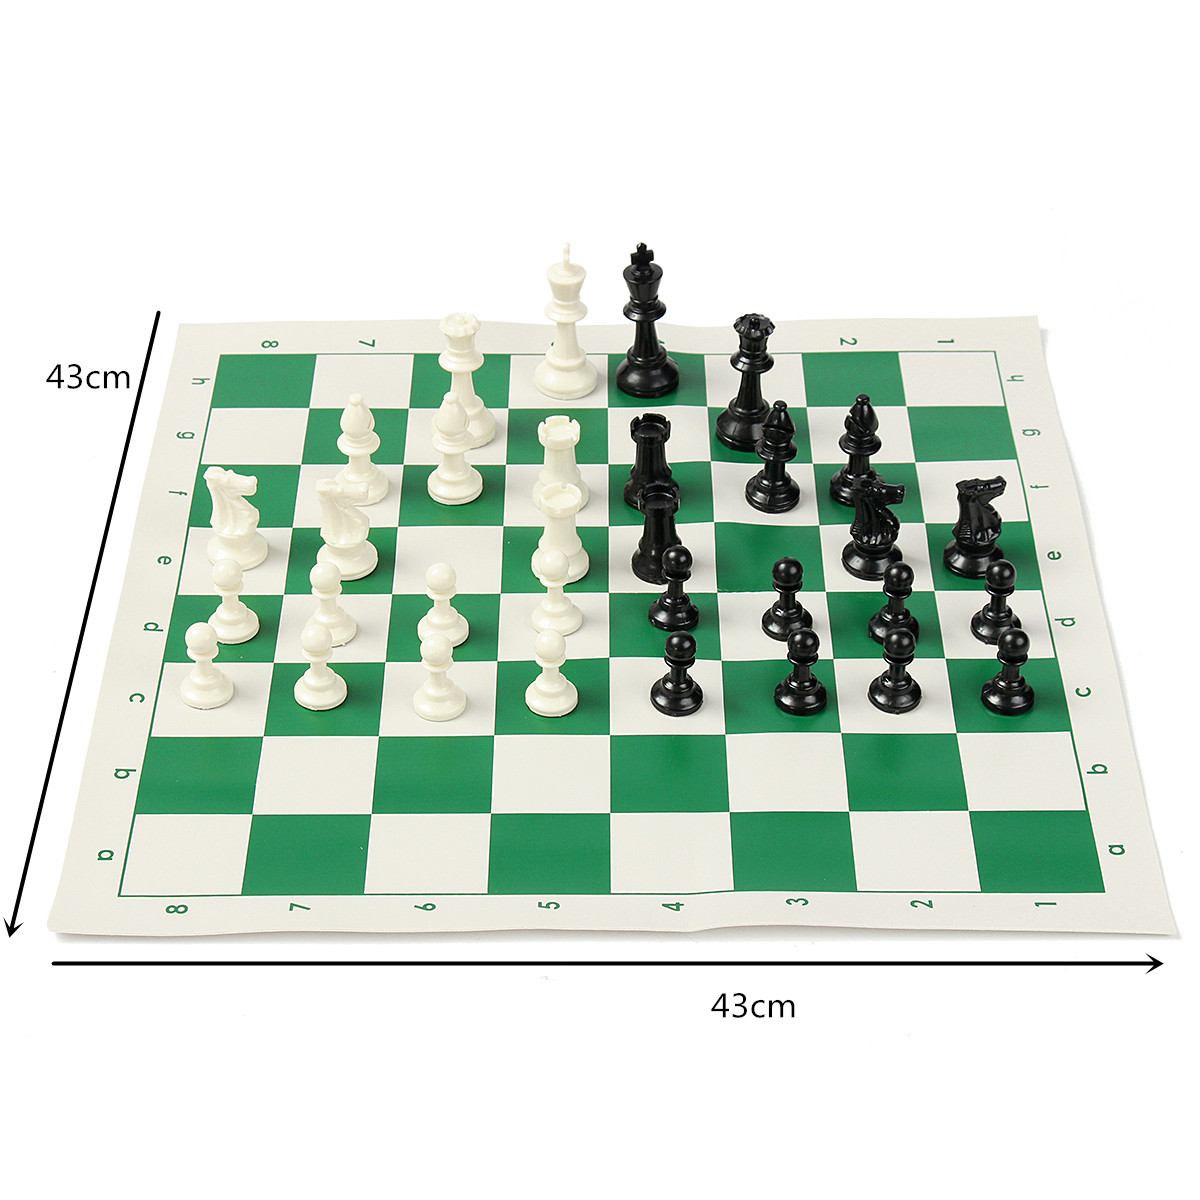 16-inch-Tournament-Chess-Set-Game-Plastic-Pieces-Green-Roll-Outdoor-Travel-Camping-Game-1356870